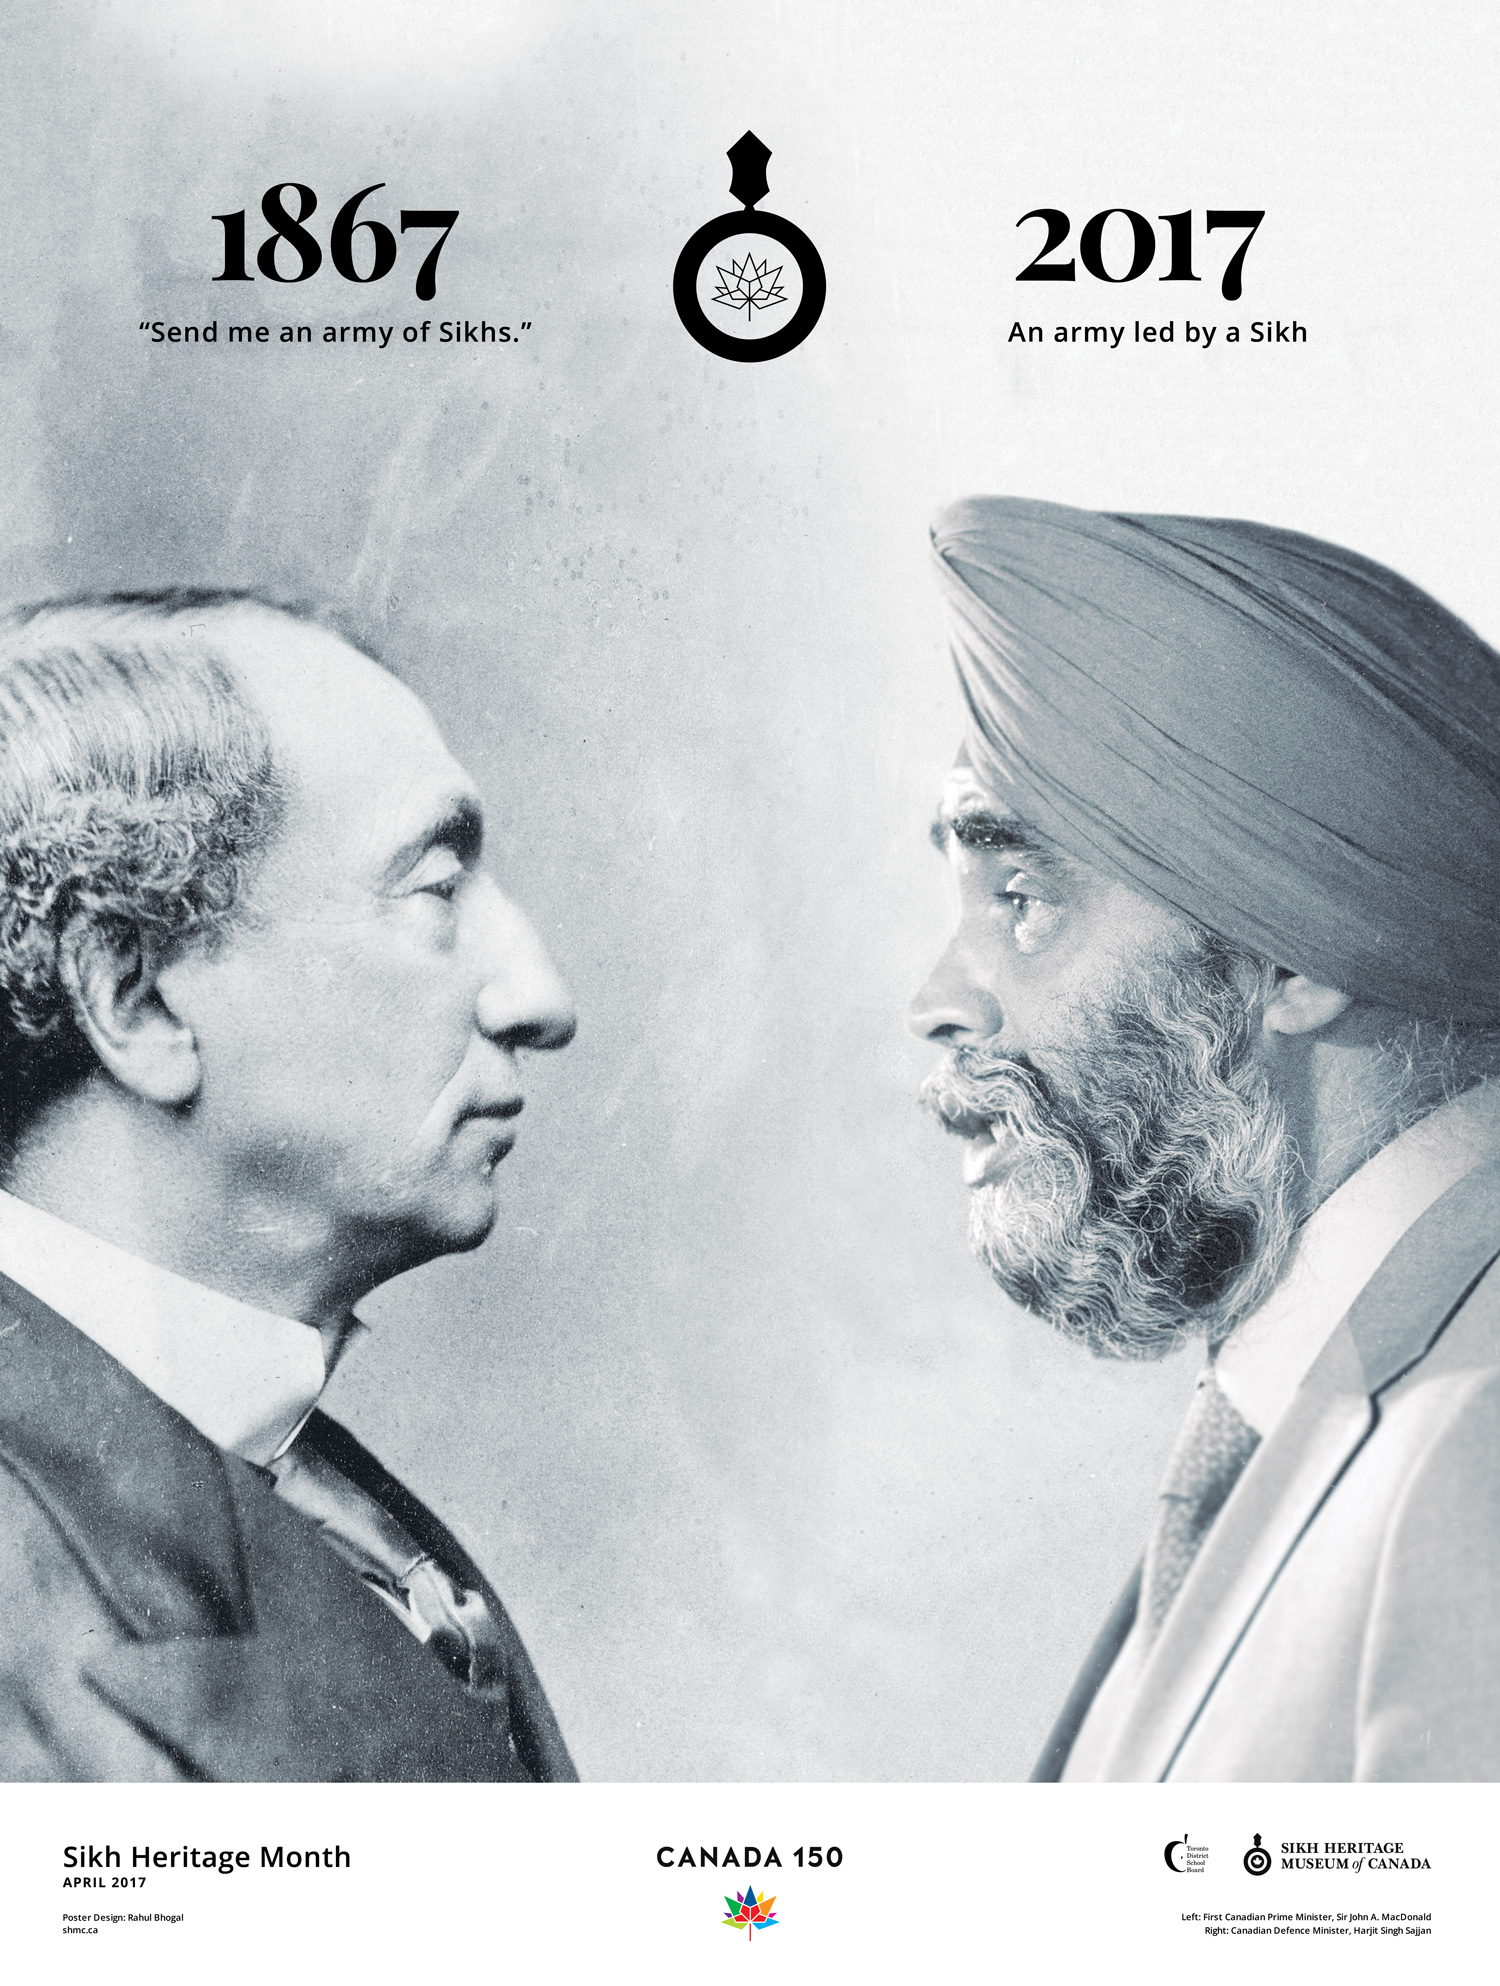 Sikh Heritage Month Act Receives Royal Assent